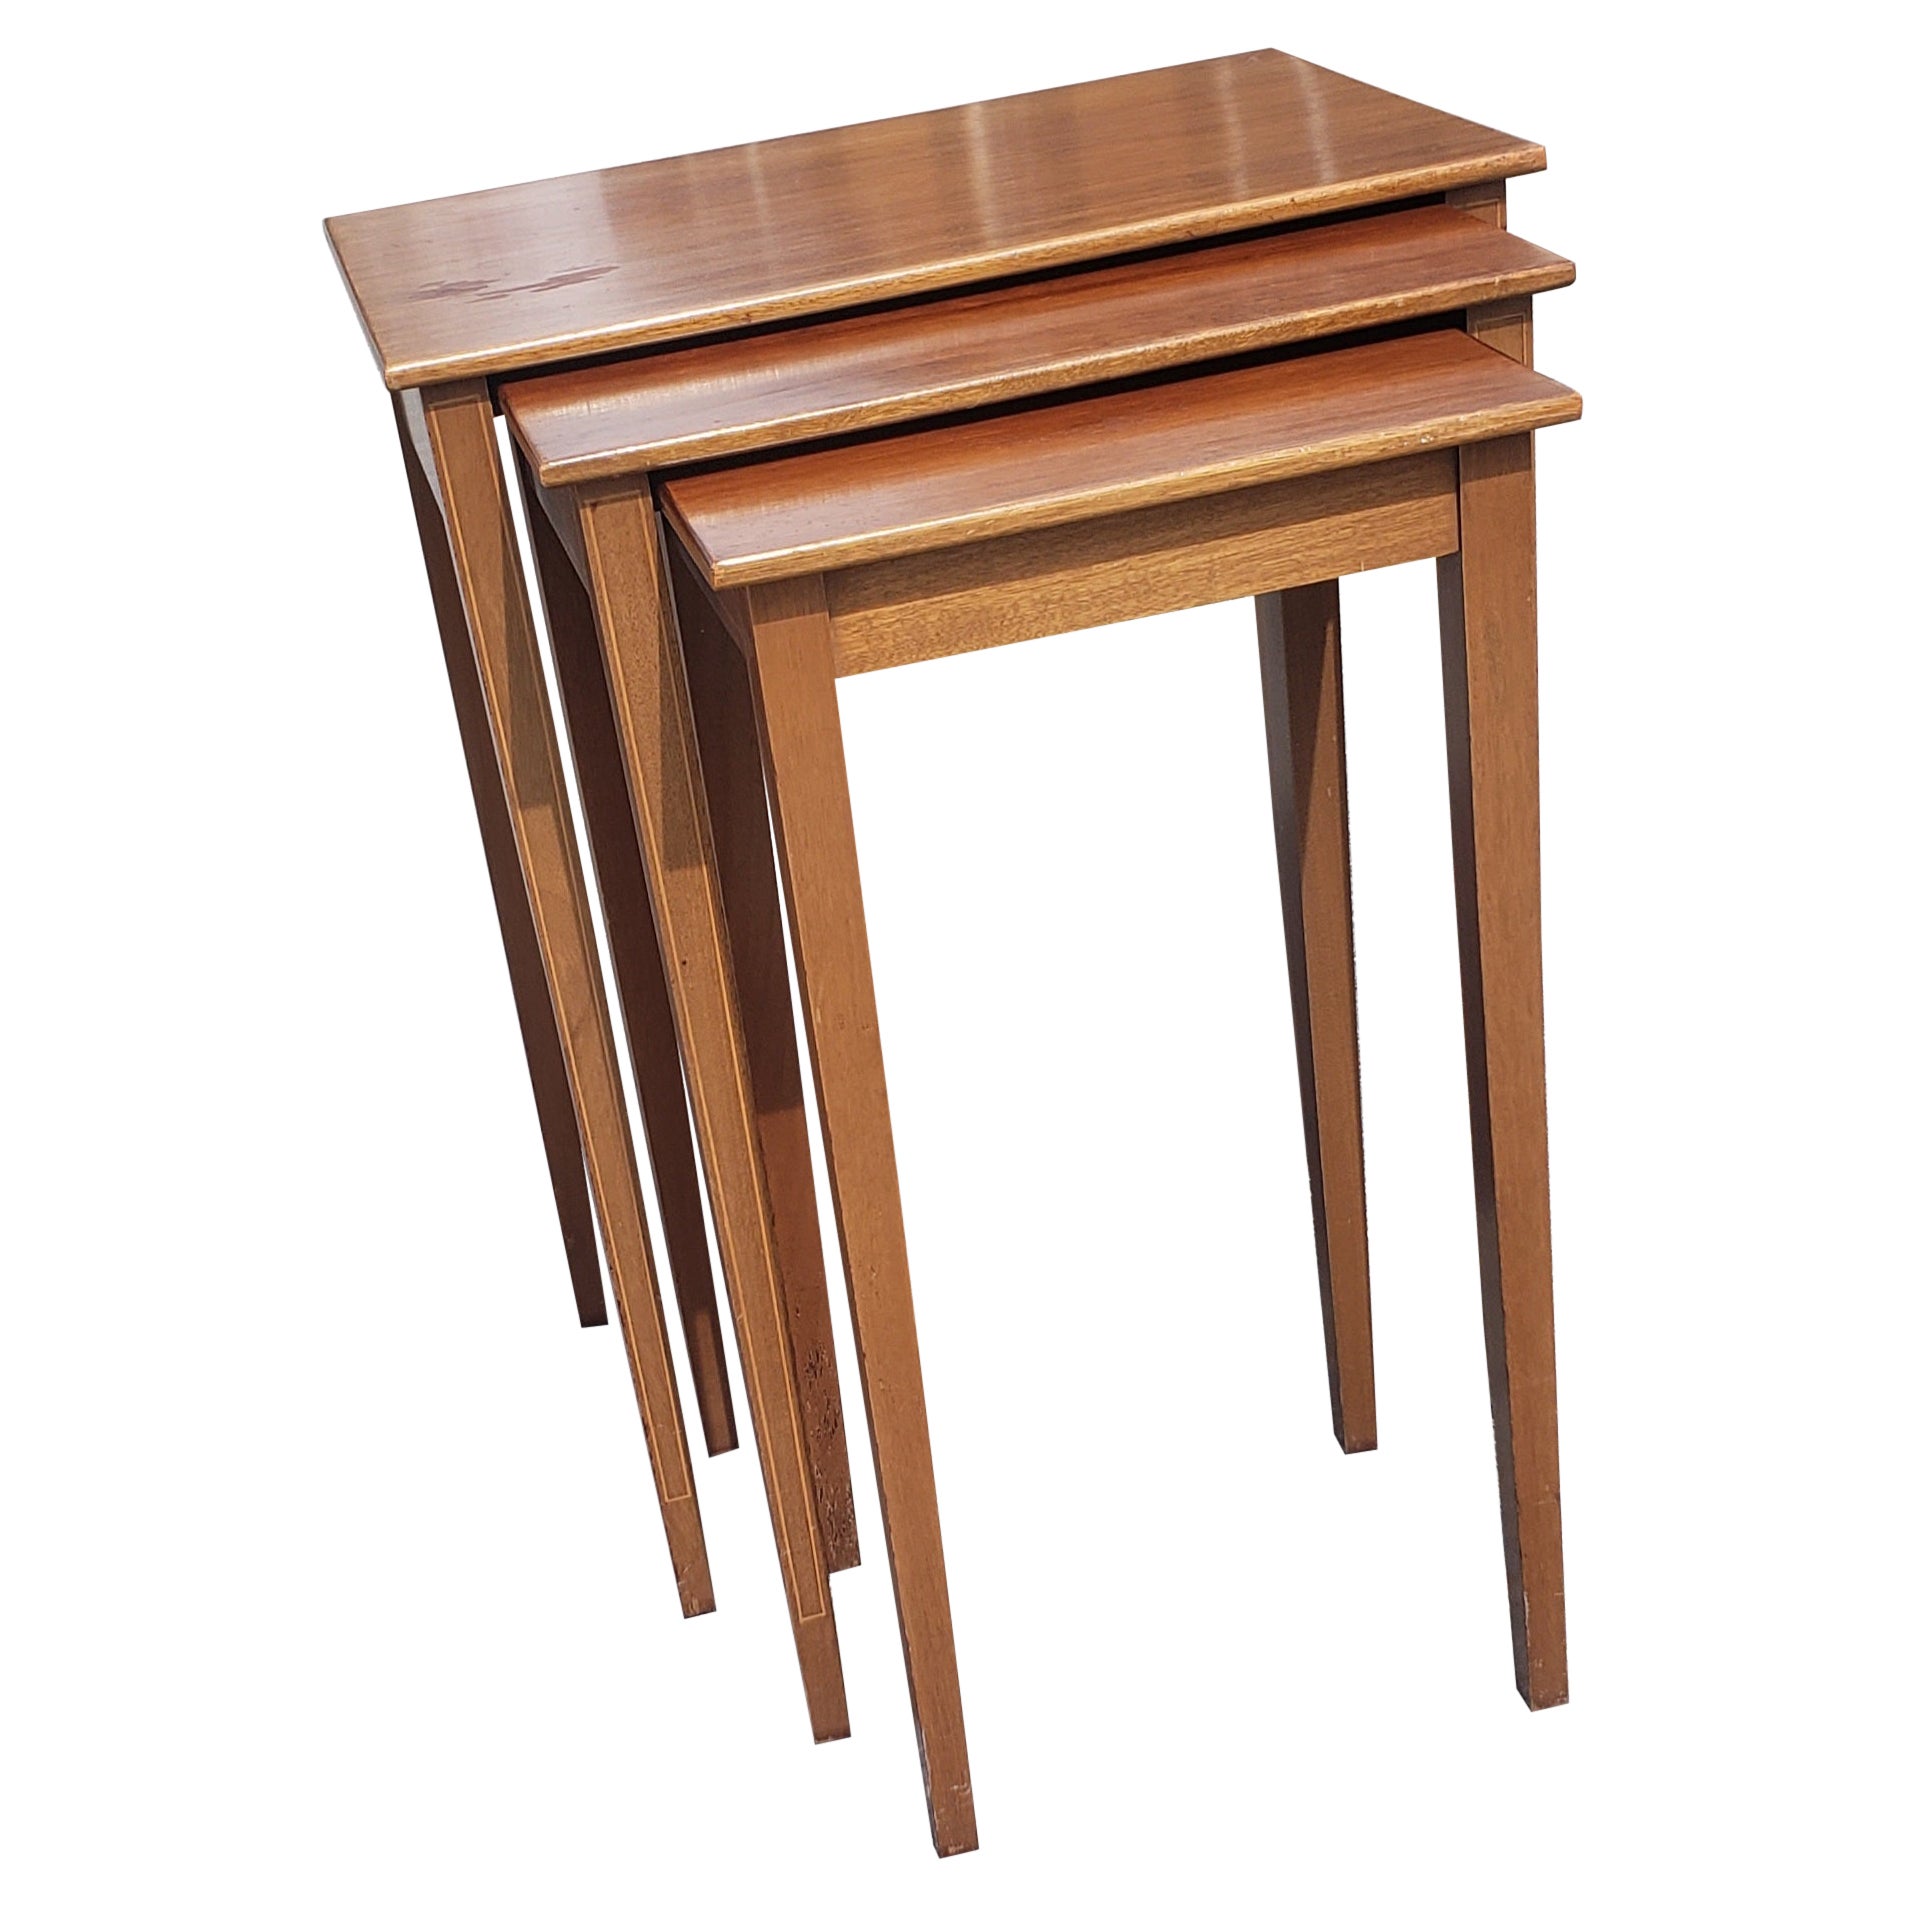 Biggs Furniture Nesting Tables and Stacking Tables